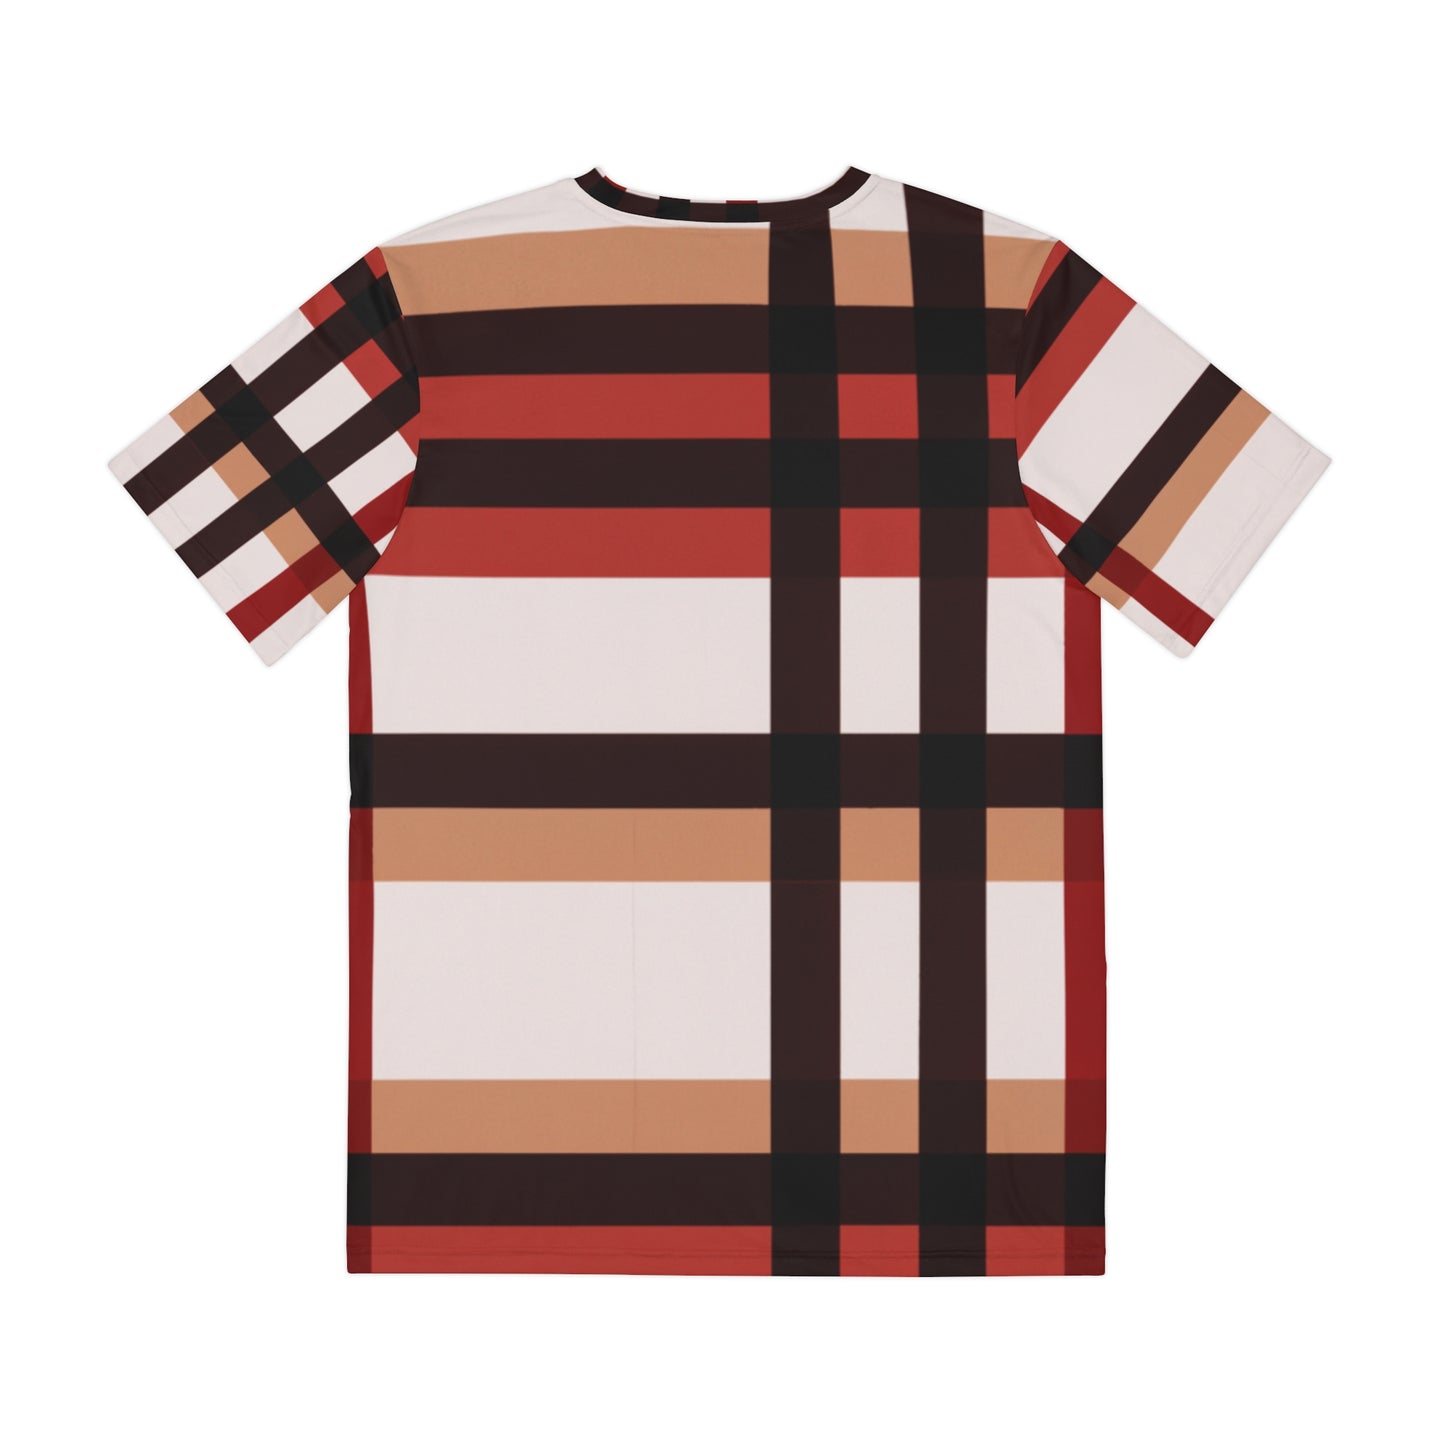 Back view of the Highlander's Array Crewneck Pullover All-Over Print Short-Sleeved Shirt white red black beige plaid pattern